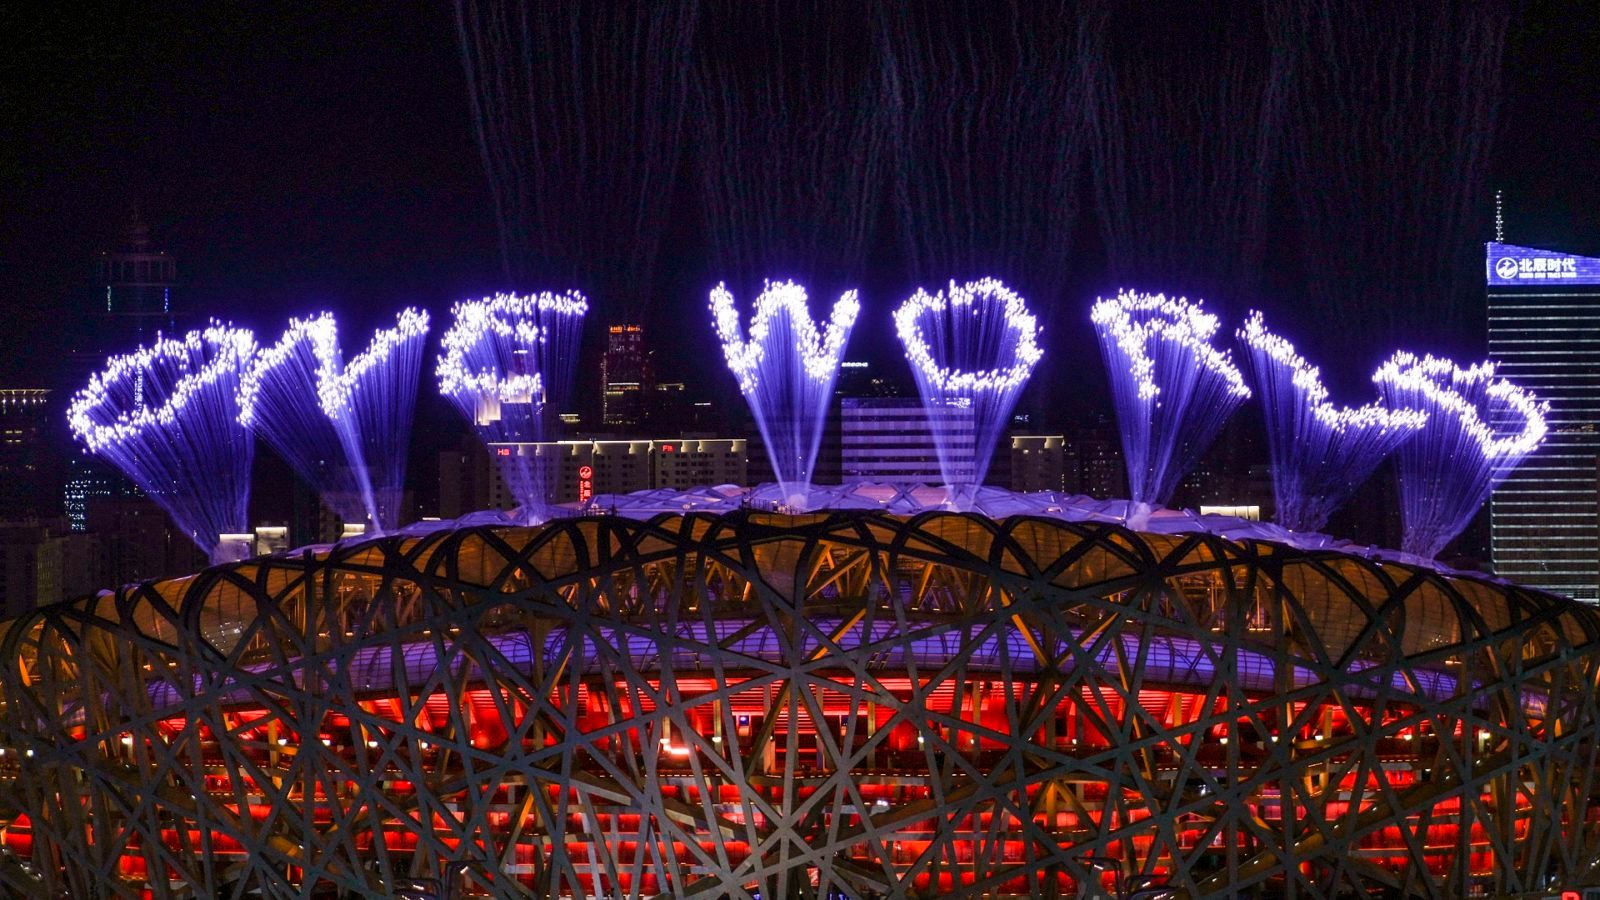 Beijing 2022 Winter Olympics ends in spectacular ceremony attended by Xi Jinping